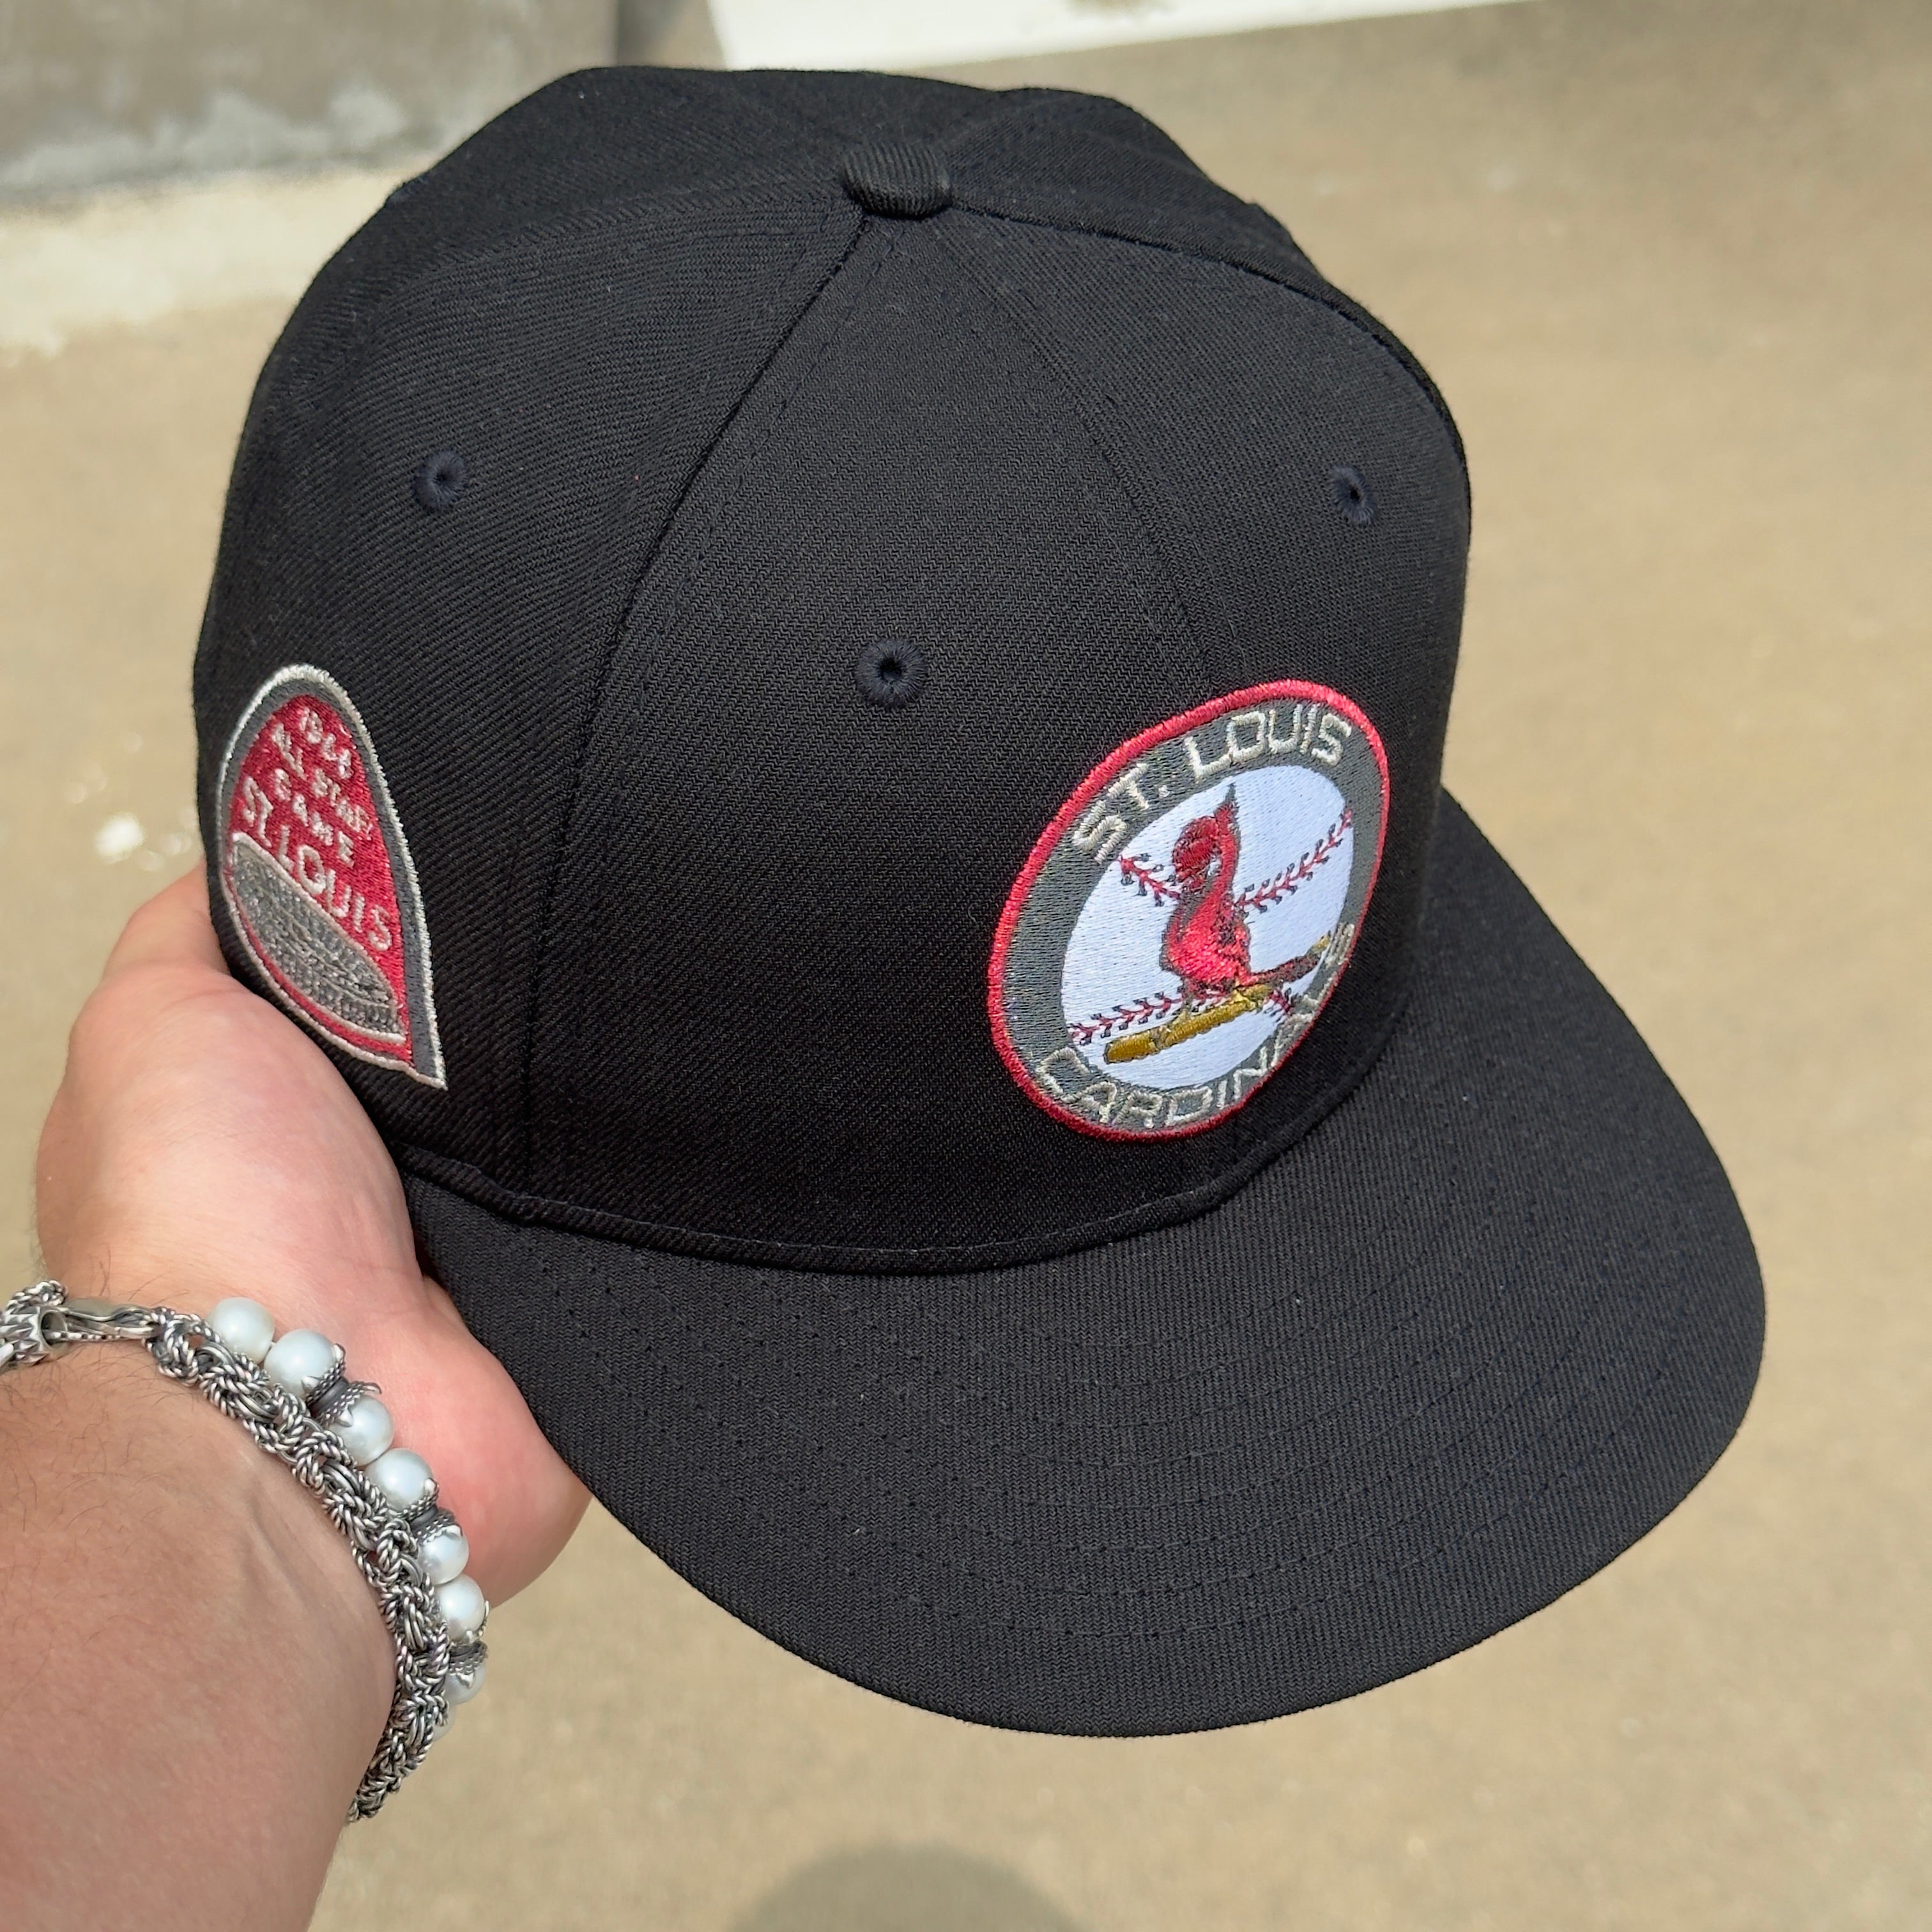 1/8 USED Black St. Louis Cardinals All Star Game 59fifty New Era Fitted Hat Cap